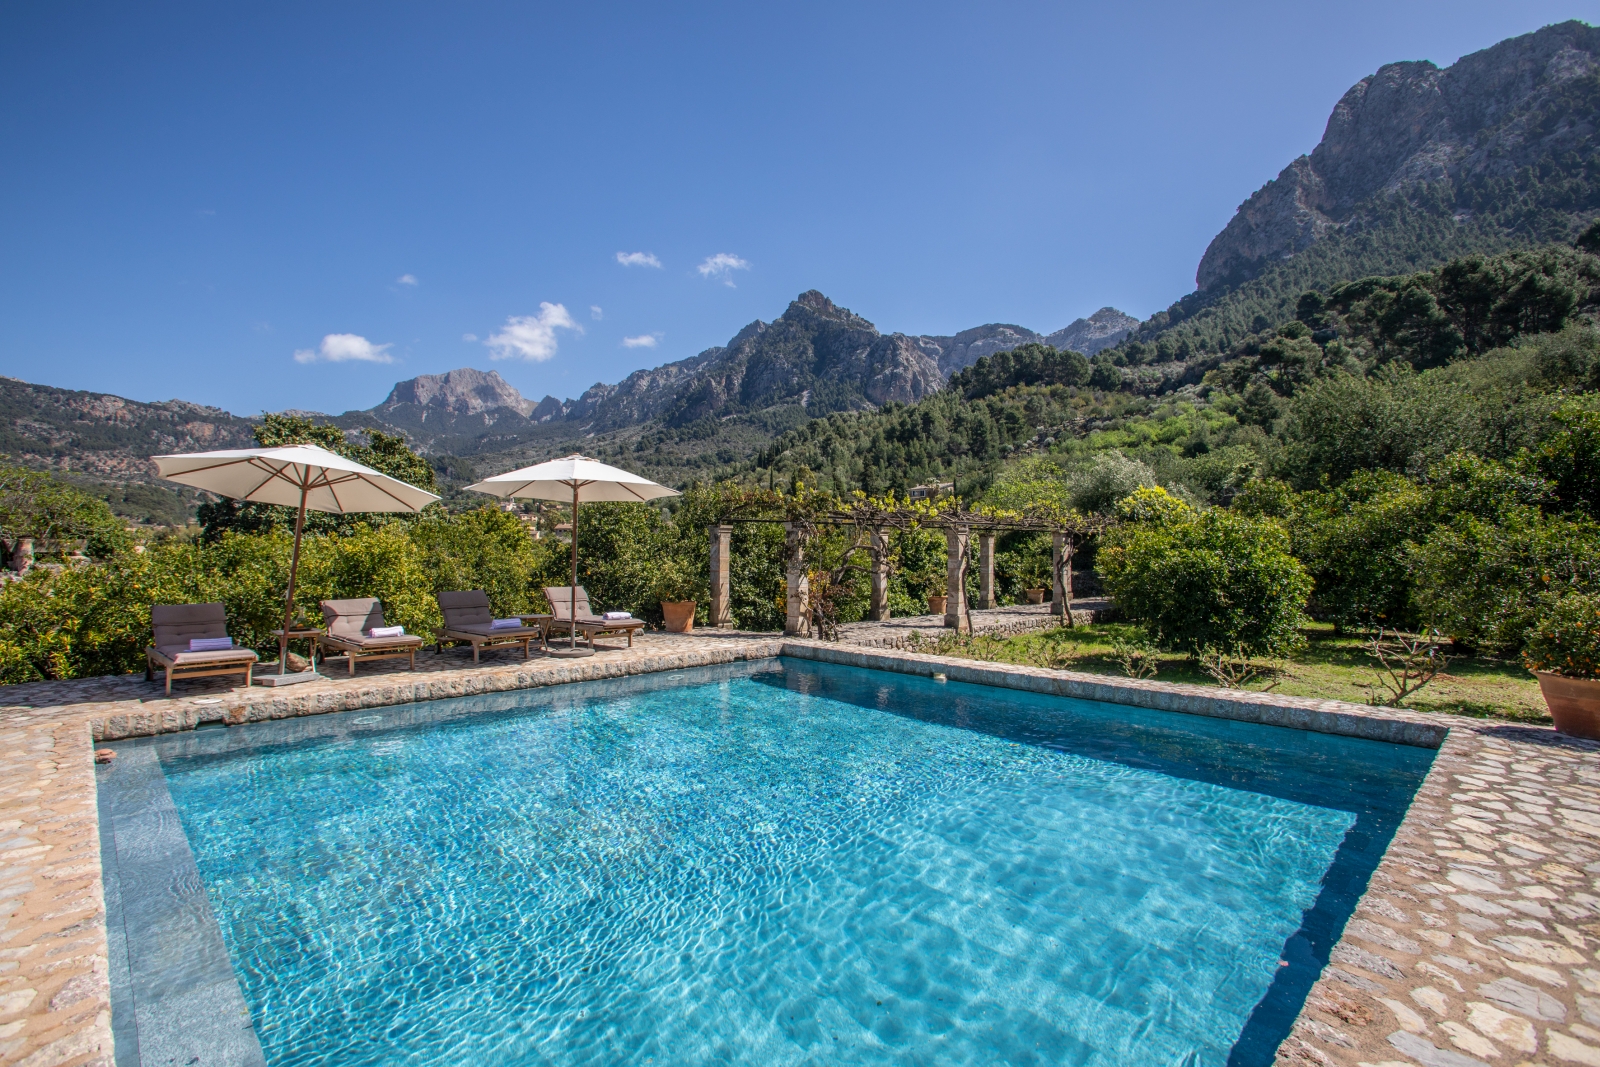 Pool with four sun loungers, two umbrellas, arbour with stone pillars and view of mountains at Can Canals in Mallorca, Spain